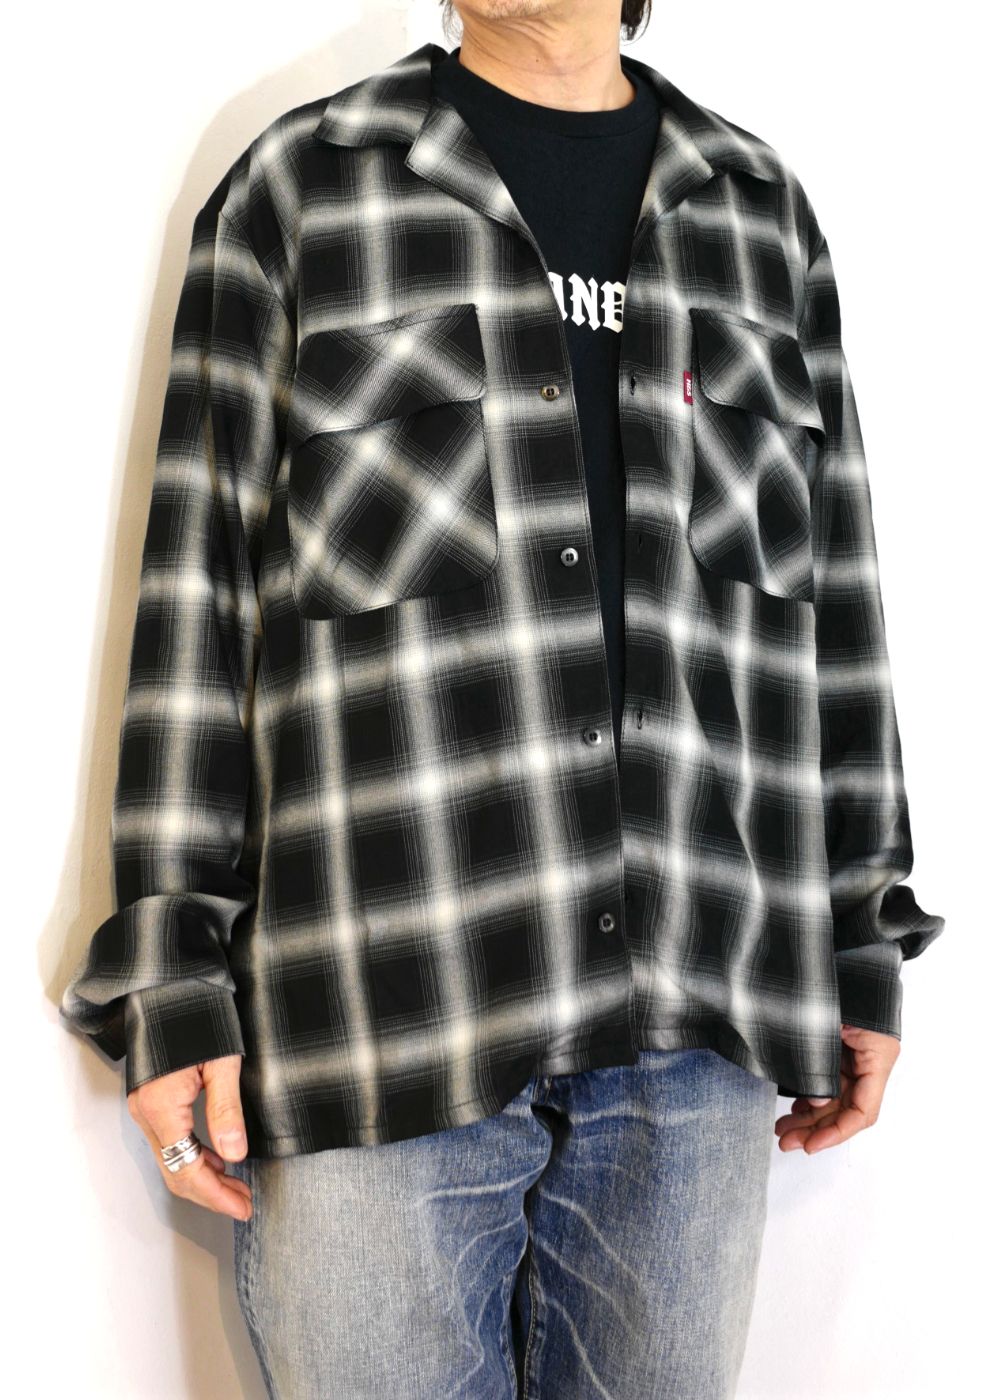 HIDE AND SEEK - OMBRE CHECK L/S SHIRT (BLACK) / オンブレチェック